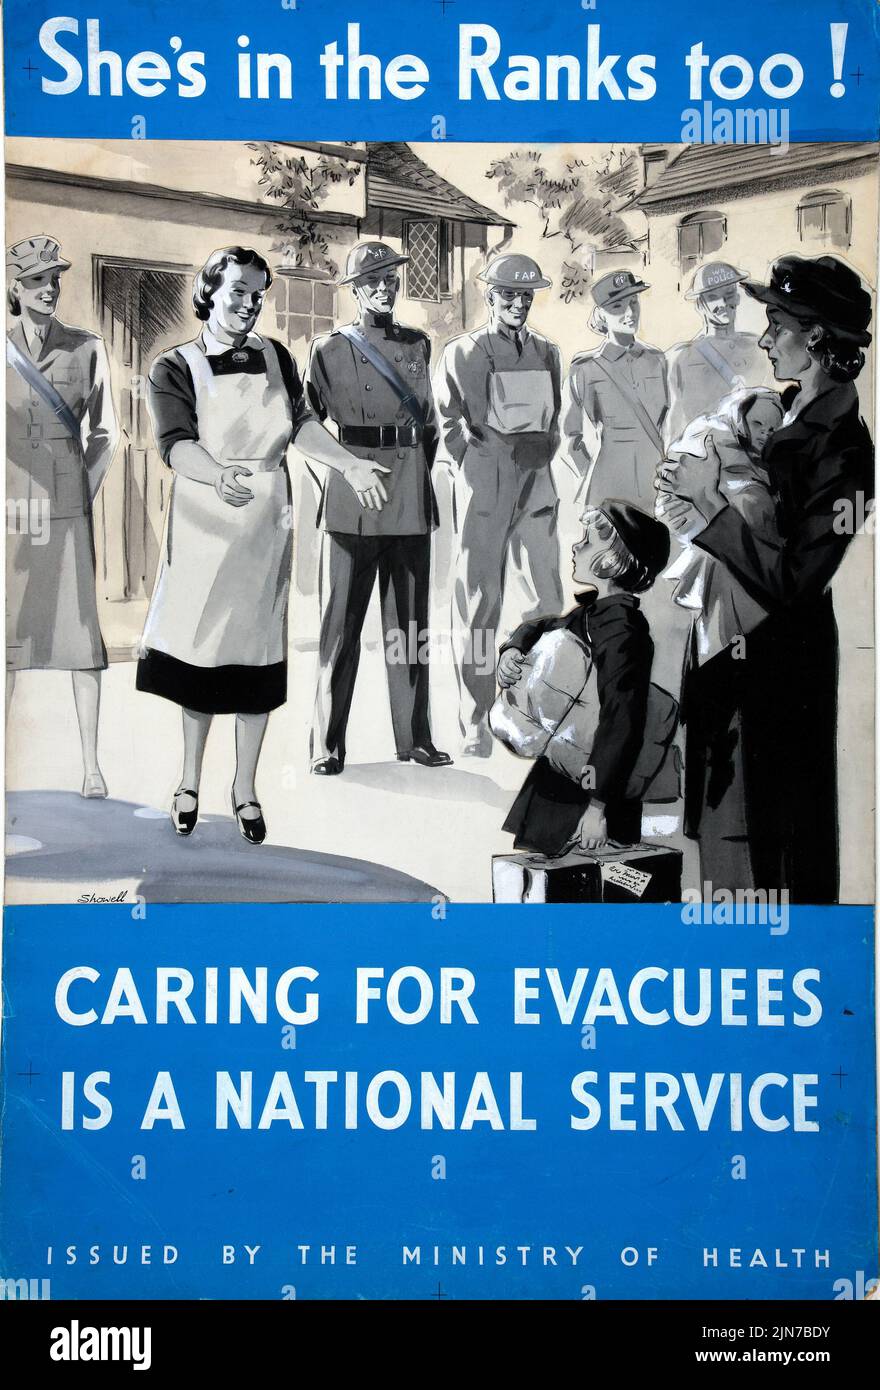 She’s in the Ranks too! Caring for evacuees is a national service, Issued by the Ministry of Health (1939 - 1946) British World War II era poster by Showell Stock Photo